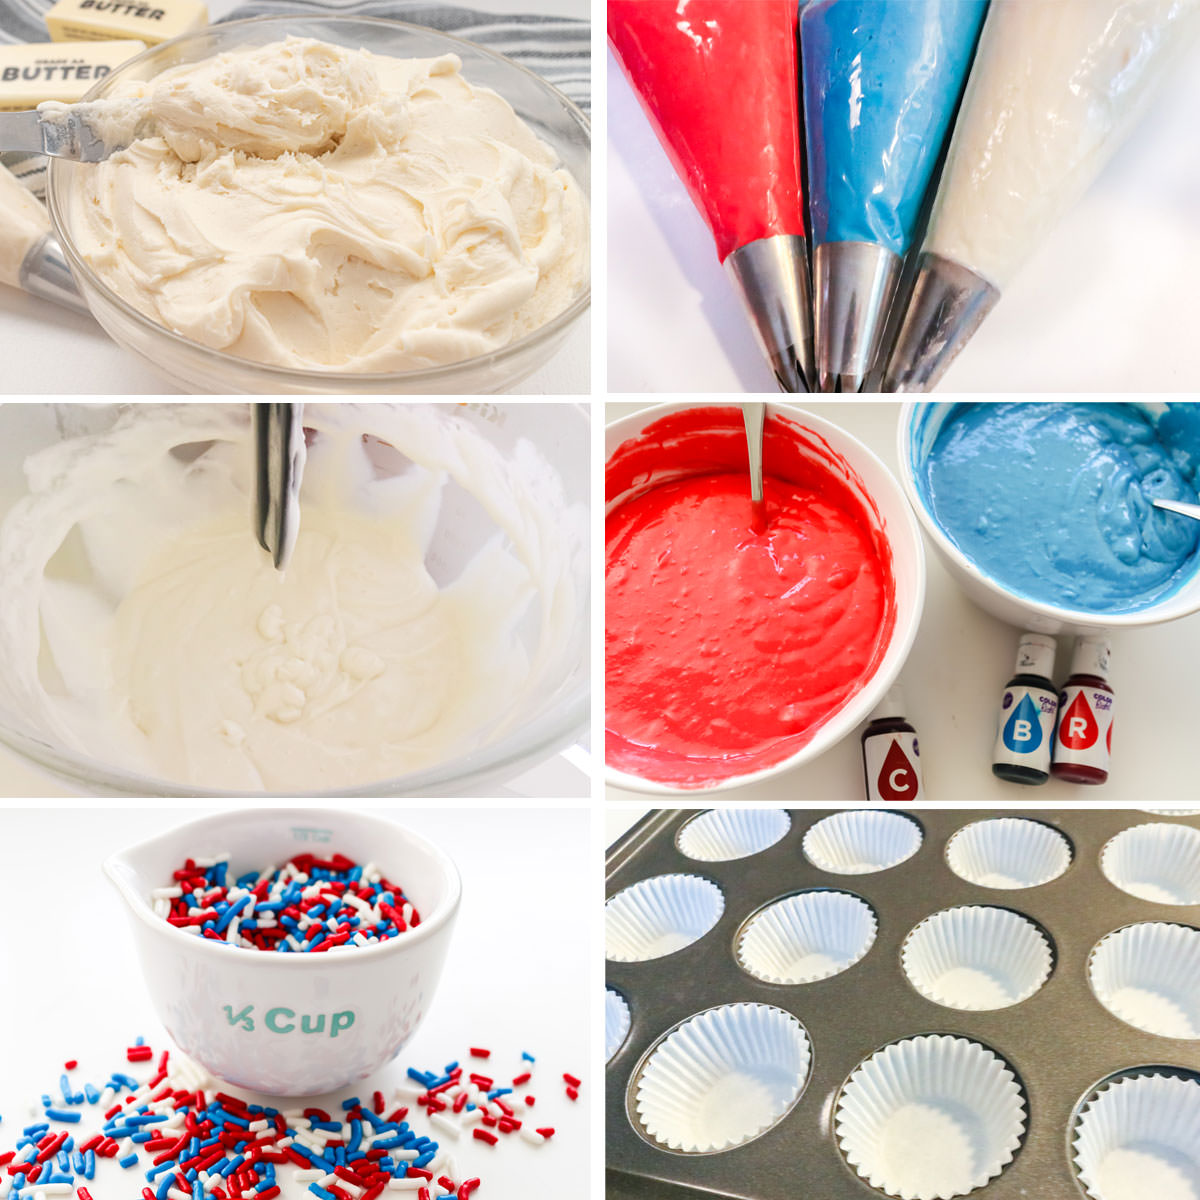 All the ingredients you will need to make six different 4th of July Cupcakes including White Cake Mix, Buttercream Frosting, Sprinkle and Food Coloring.